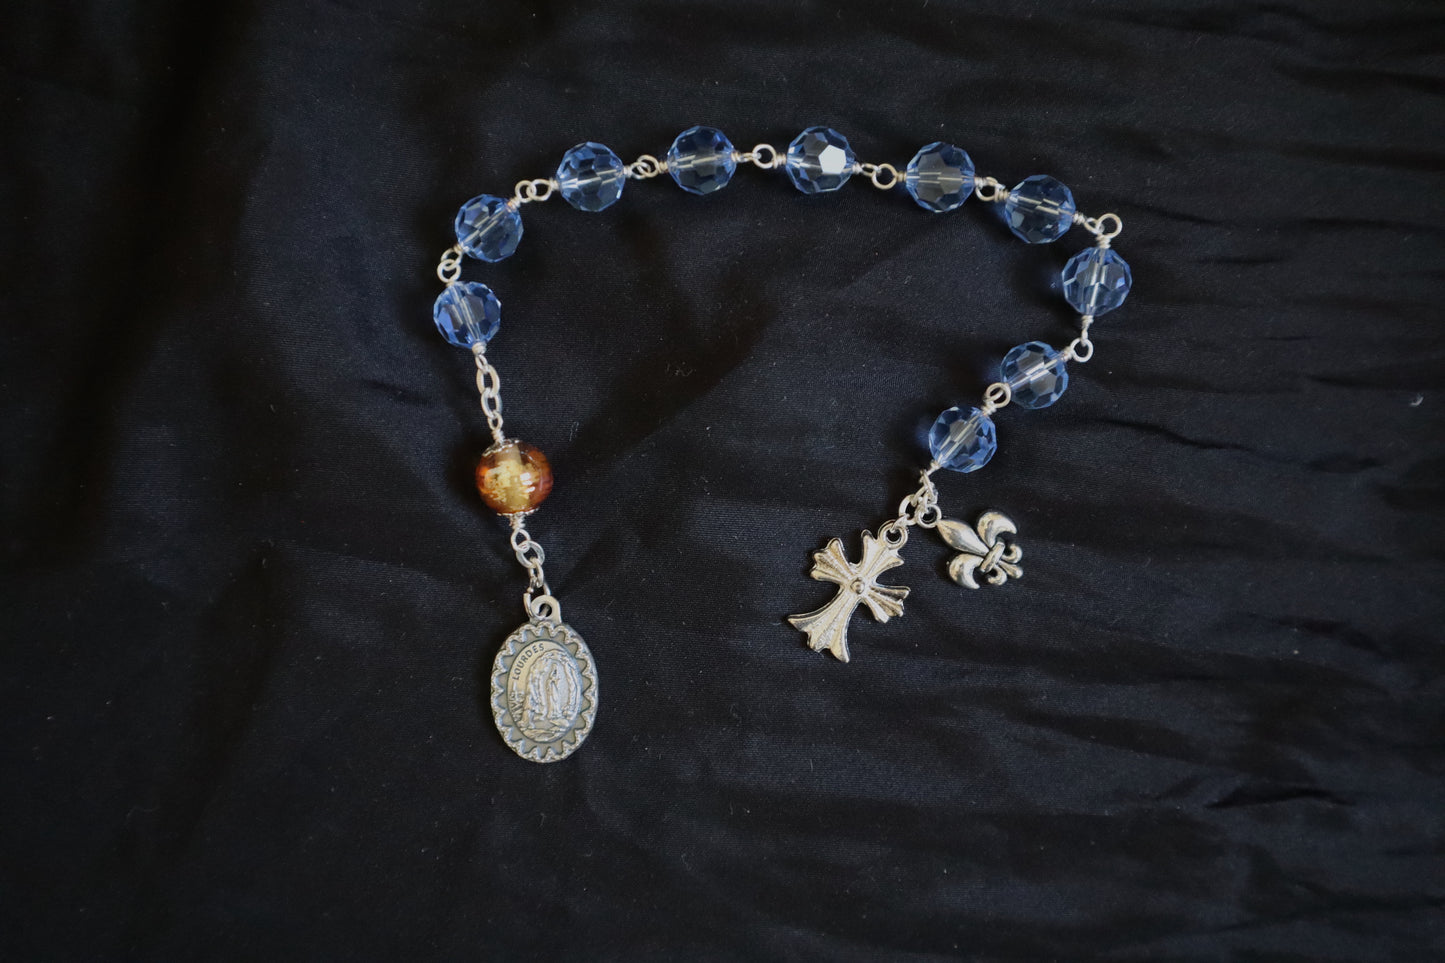 Our Lady of Lourdes Pocket Rosary